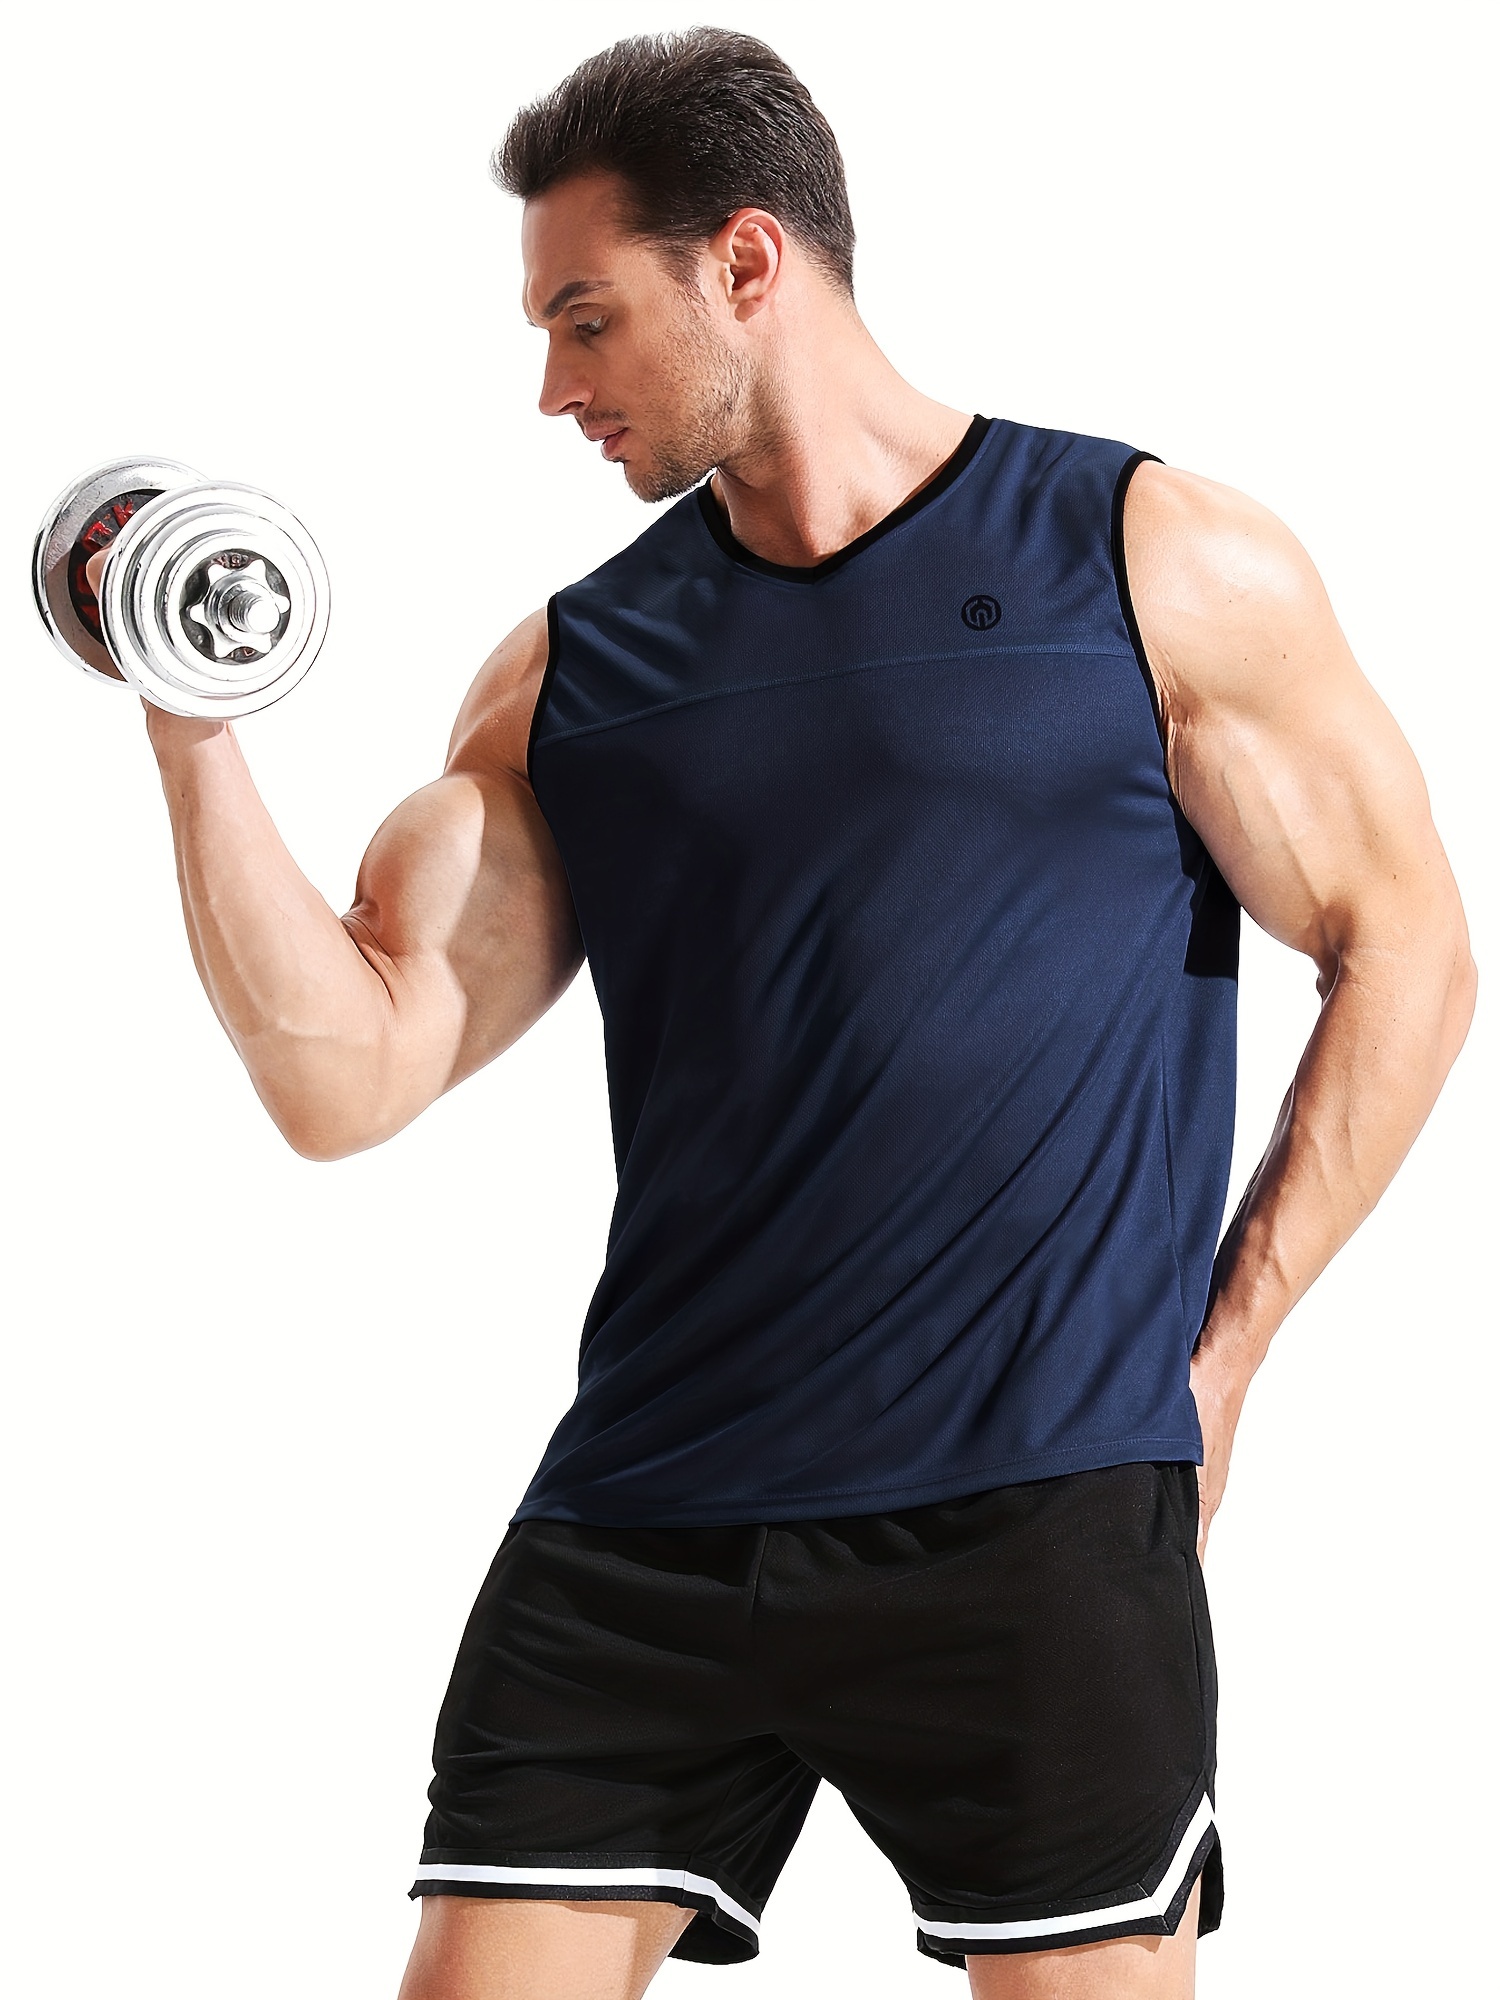 LIVE FIT Men's Fashion Quick-drying Sports Leisure Vest Fitness